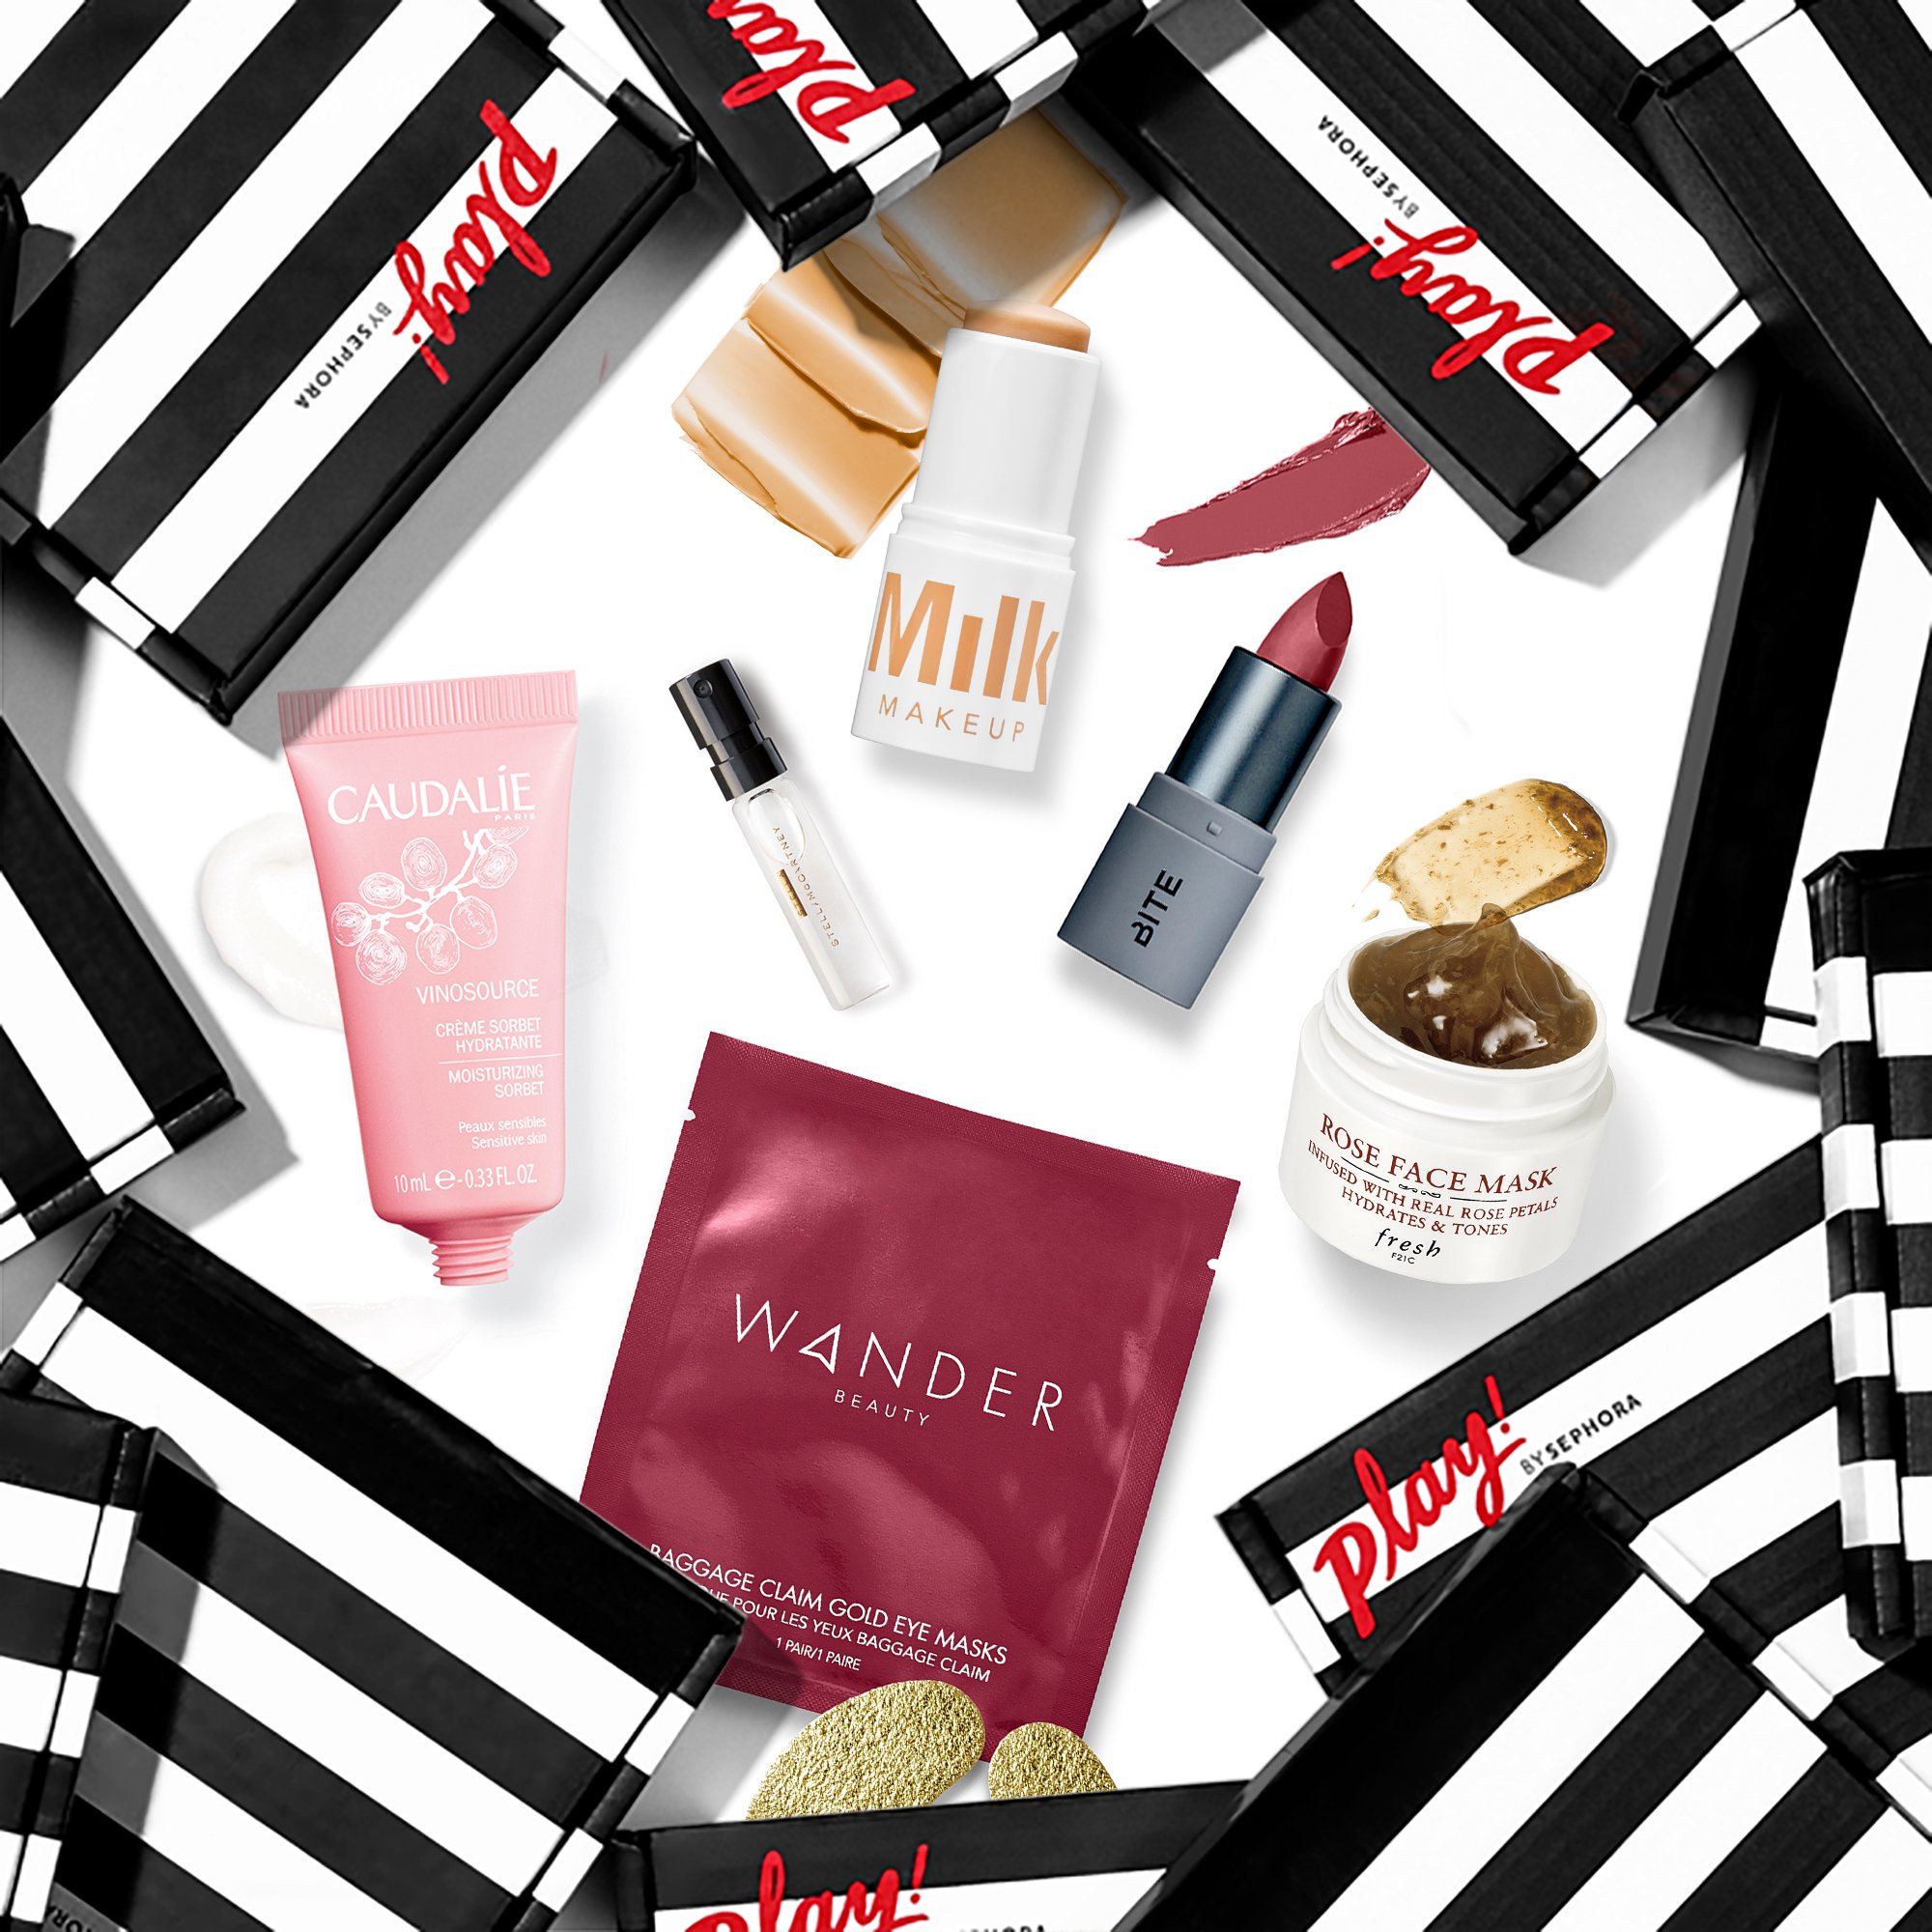 Sephora Sale – Past Play! By Sephora Boxes Now $9!